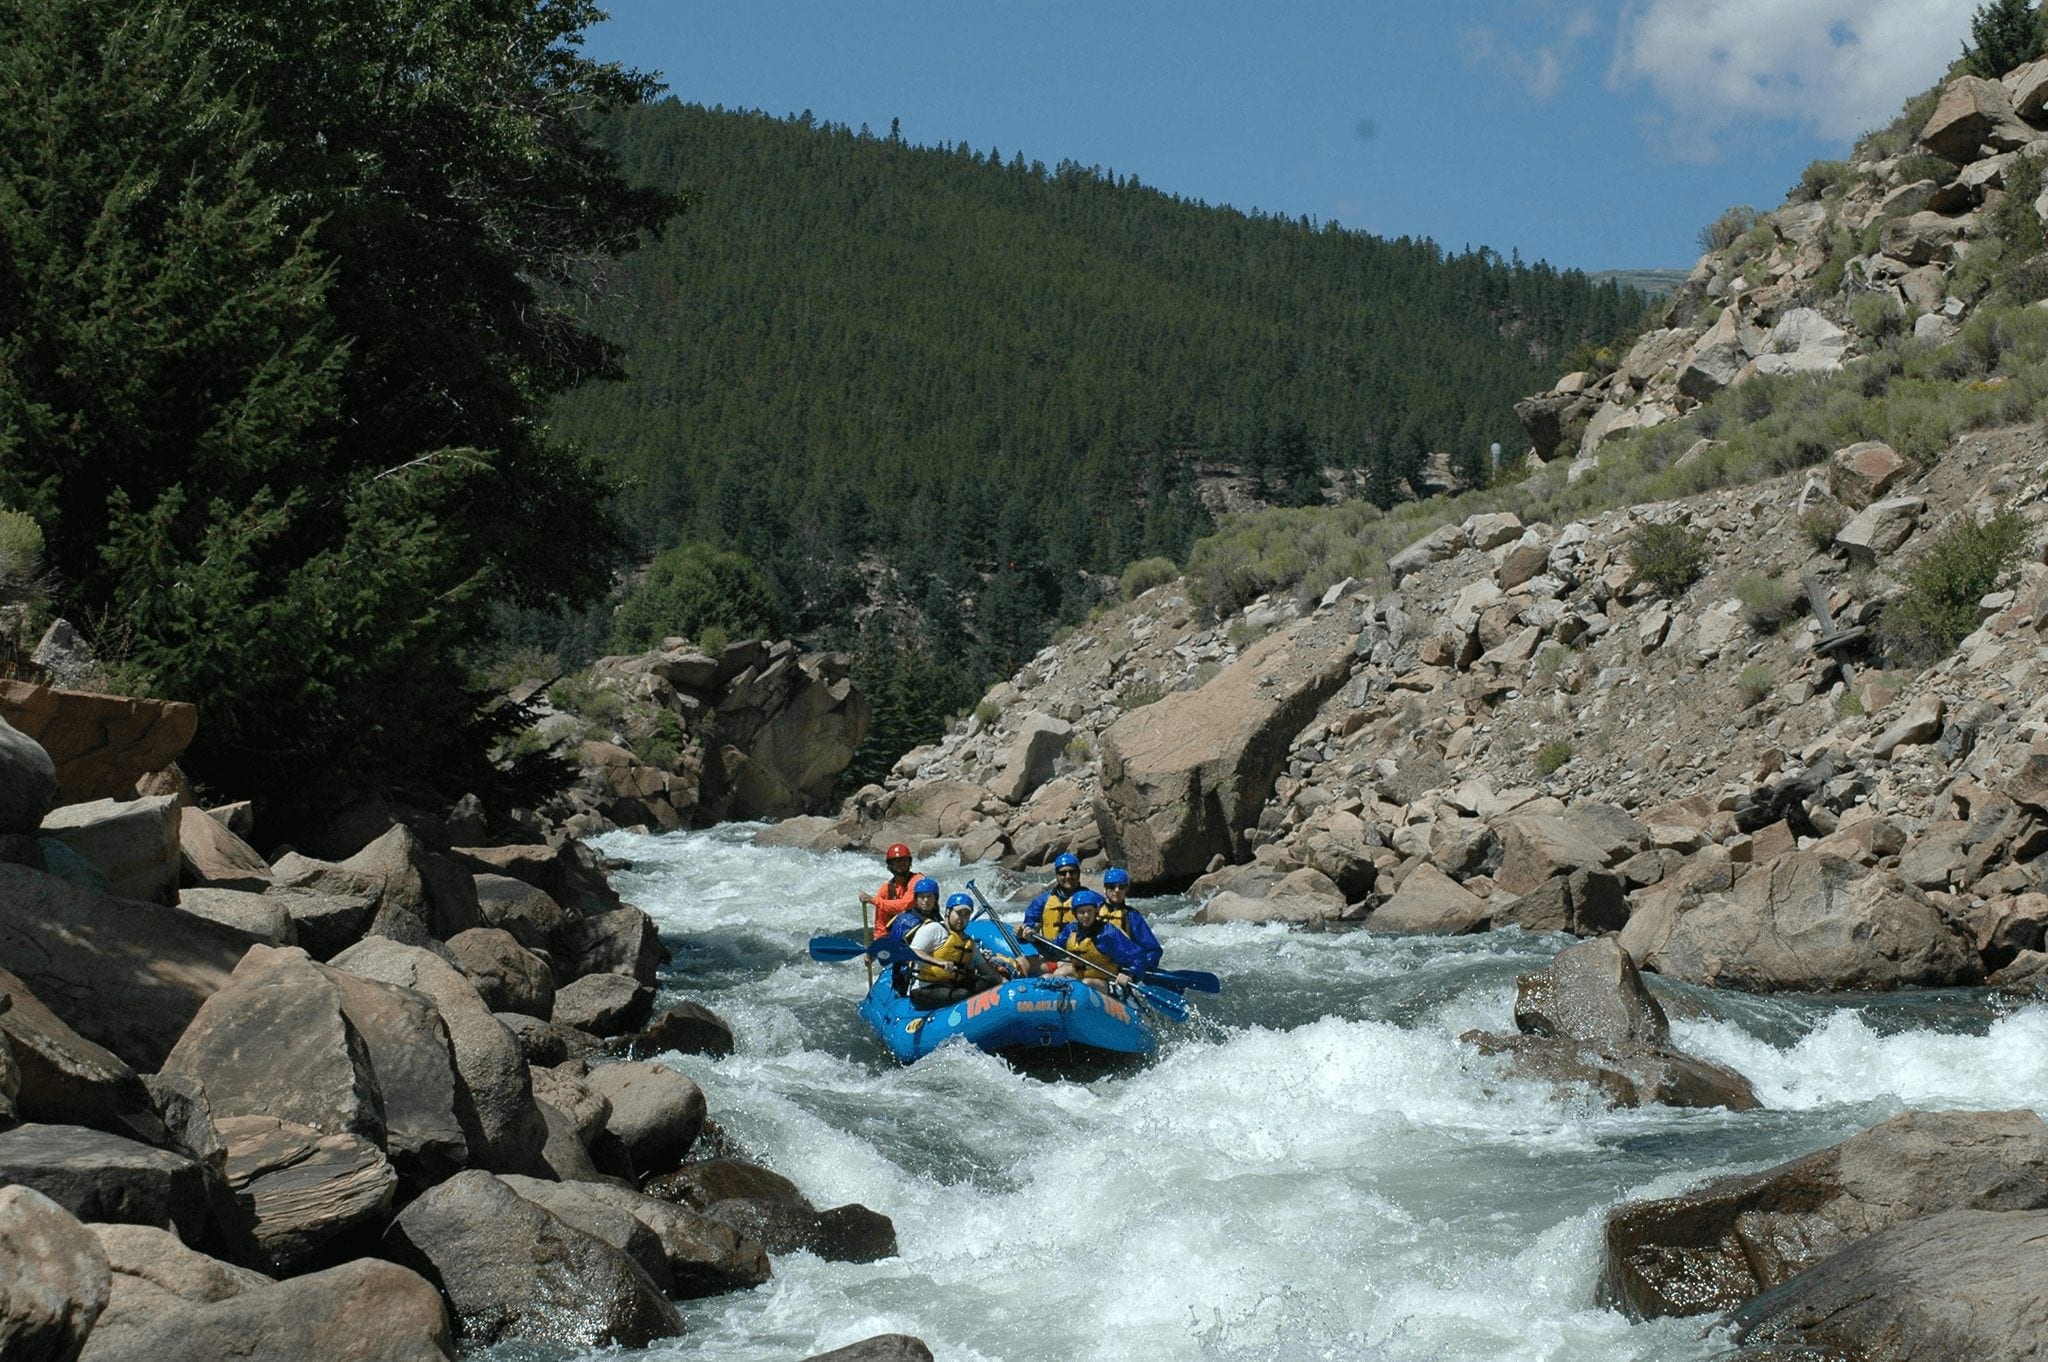 A group rafting against a scenic mountain view in Breckenridge